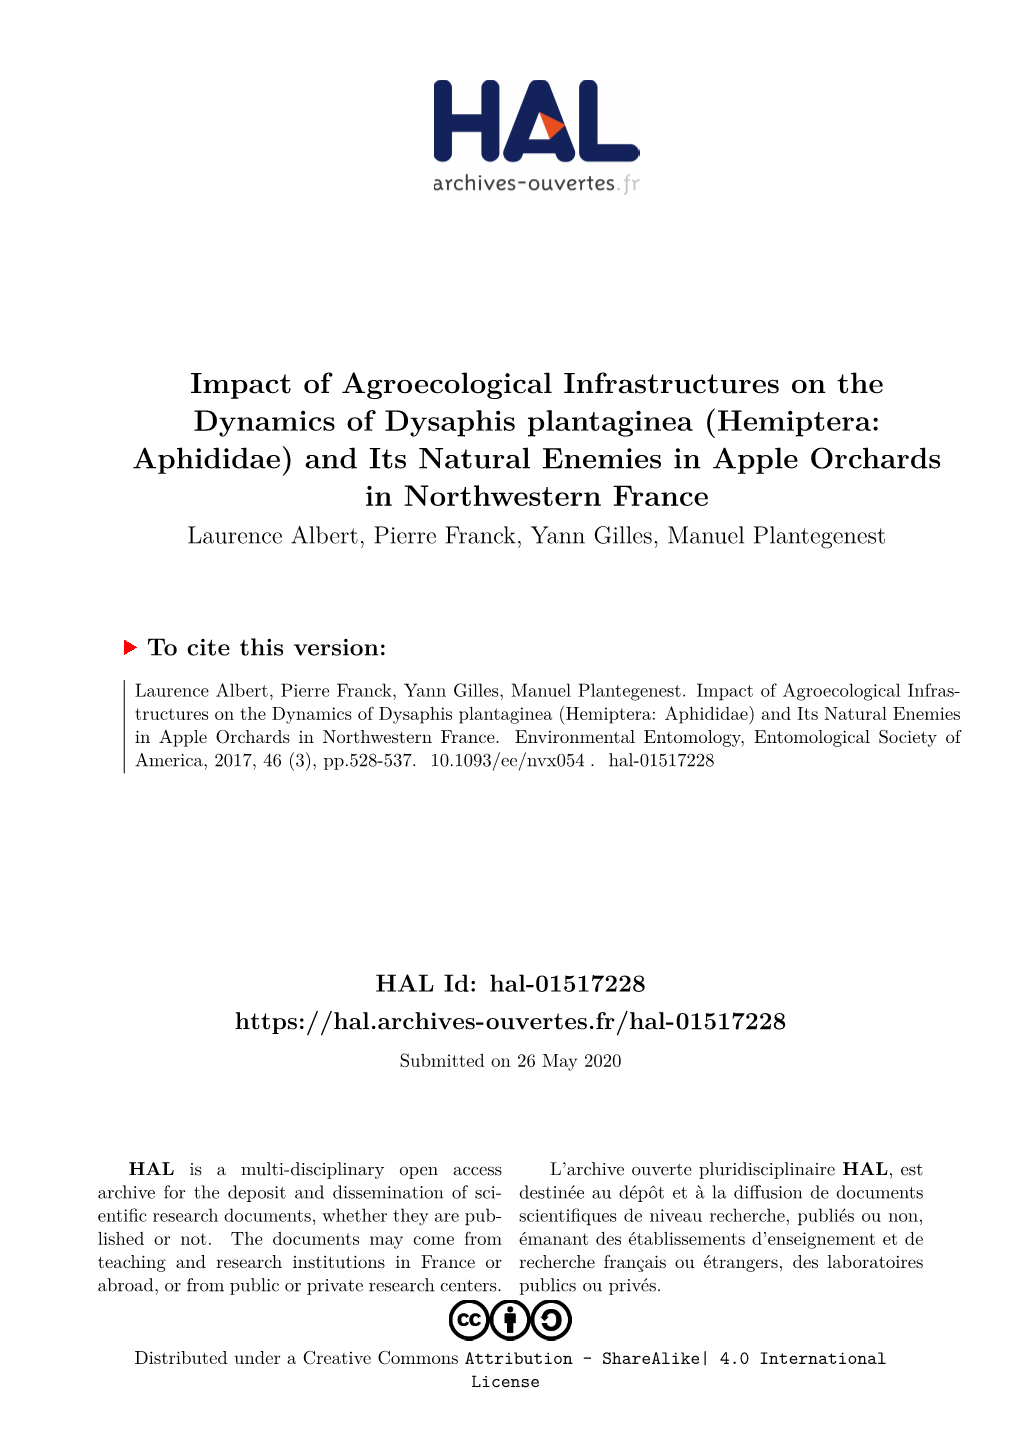 Impact of Agroecological Infrastructures on the Dynamics Of